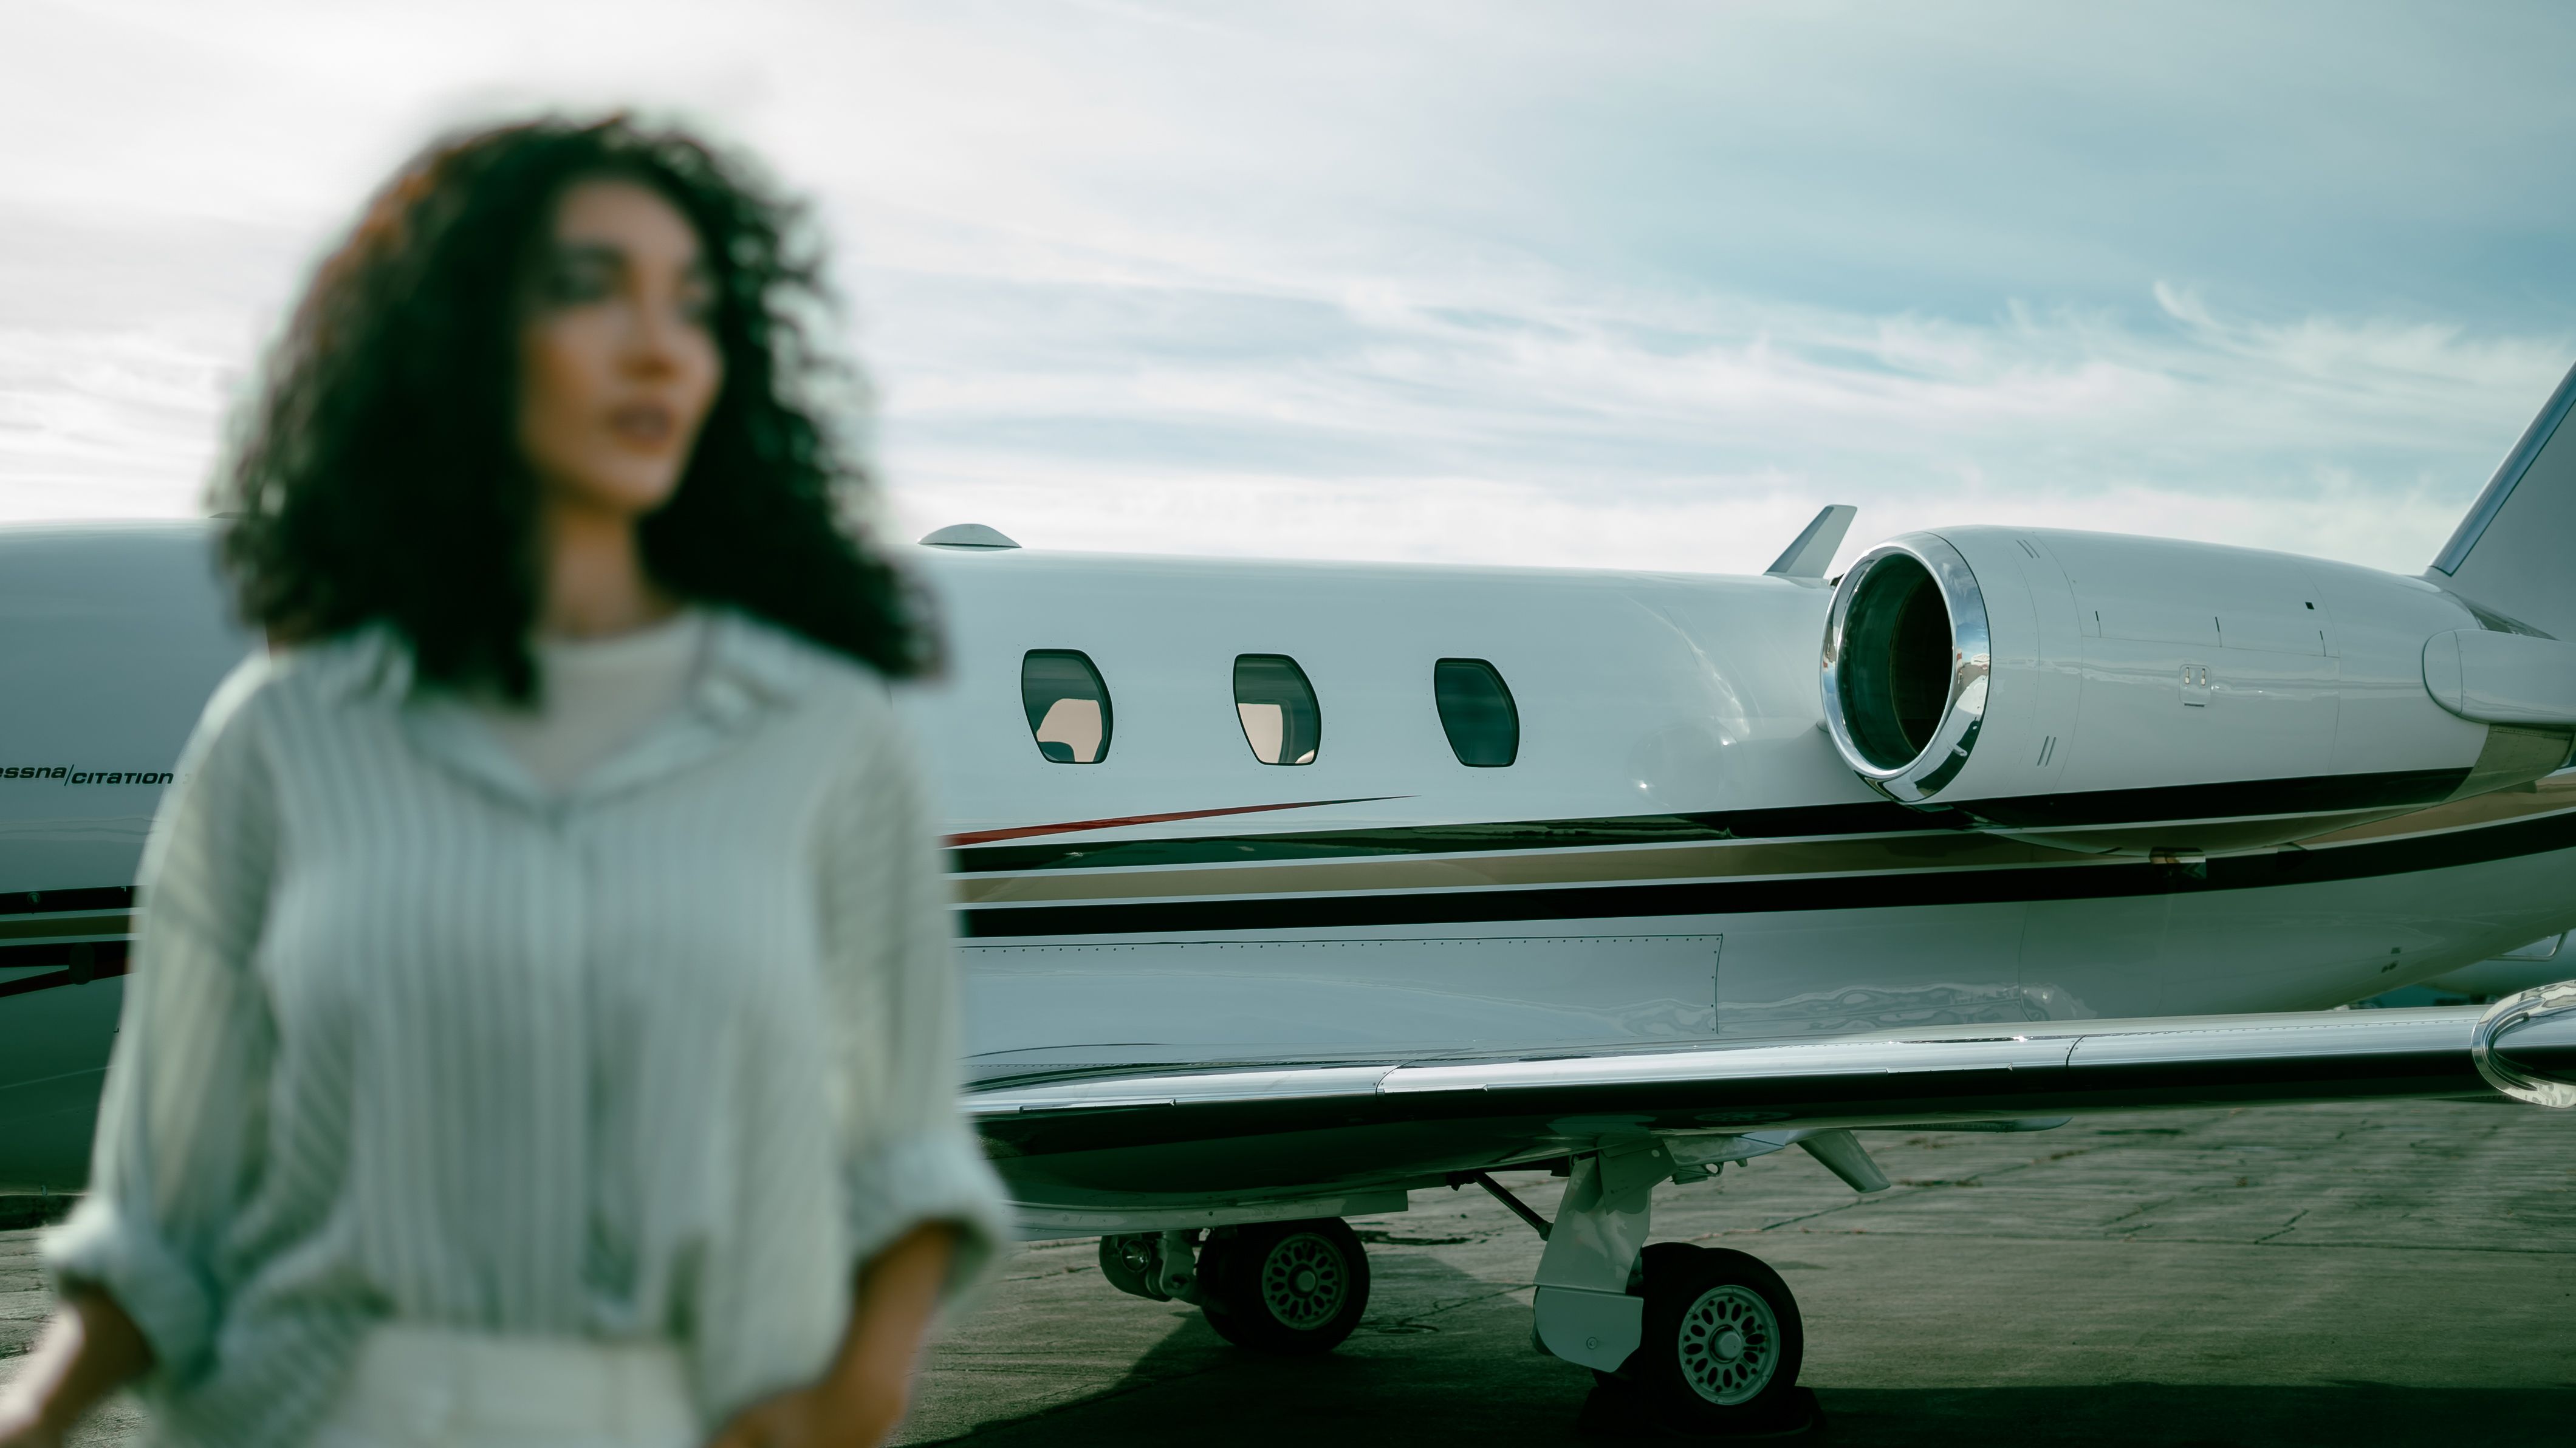 A client stands in front of a privately chartered jet by Flygreen